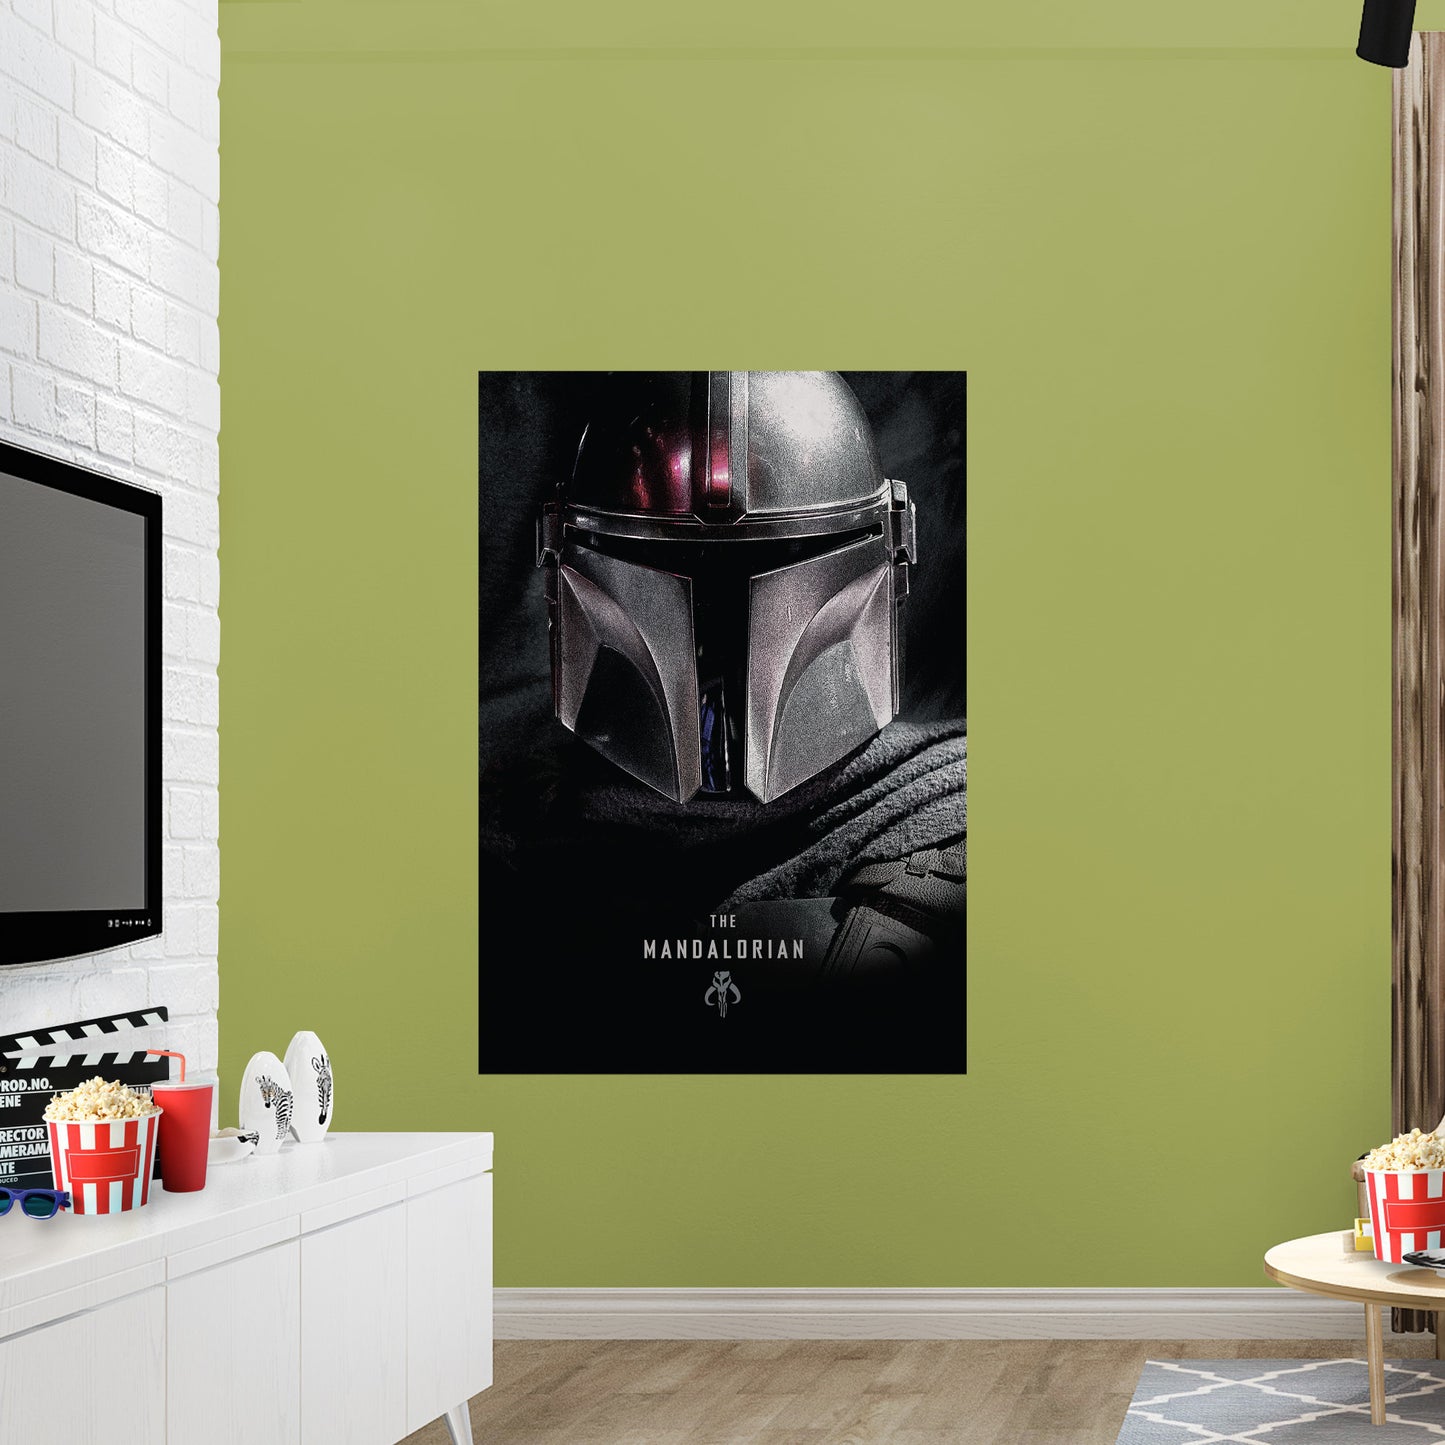 The Mandalorian: The Mandalorian Helmet Poster        - Officially Licensed Star Wars Removable     Adhesive Decal